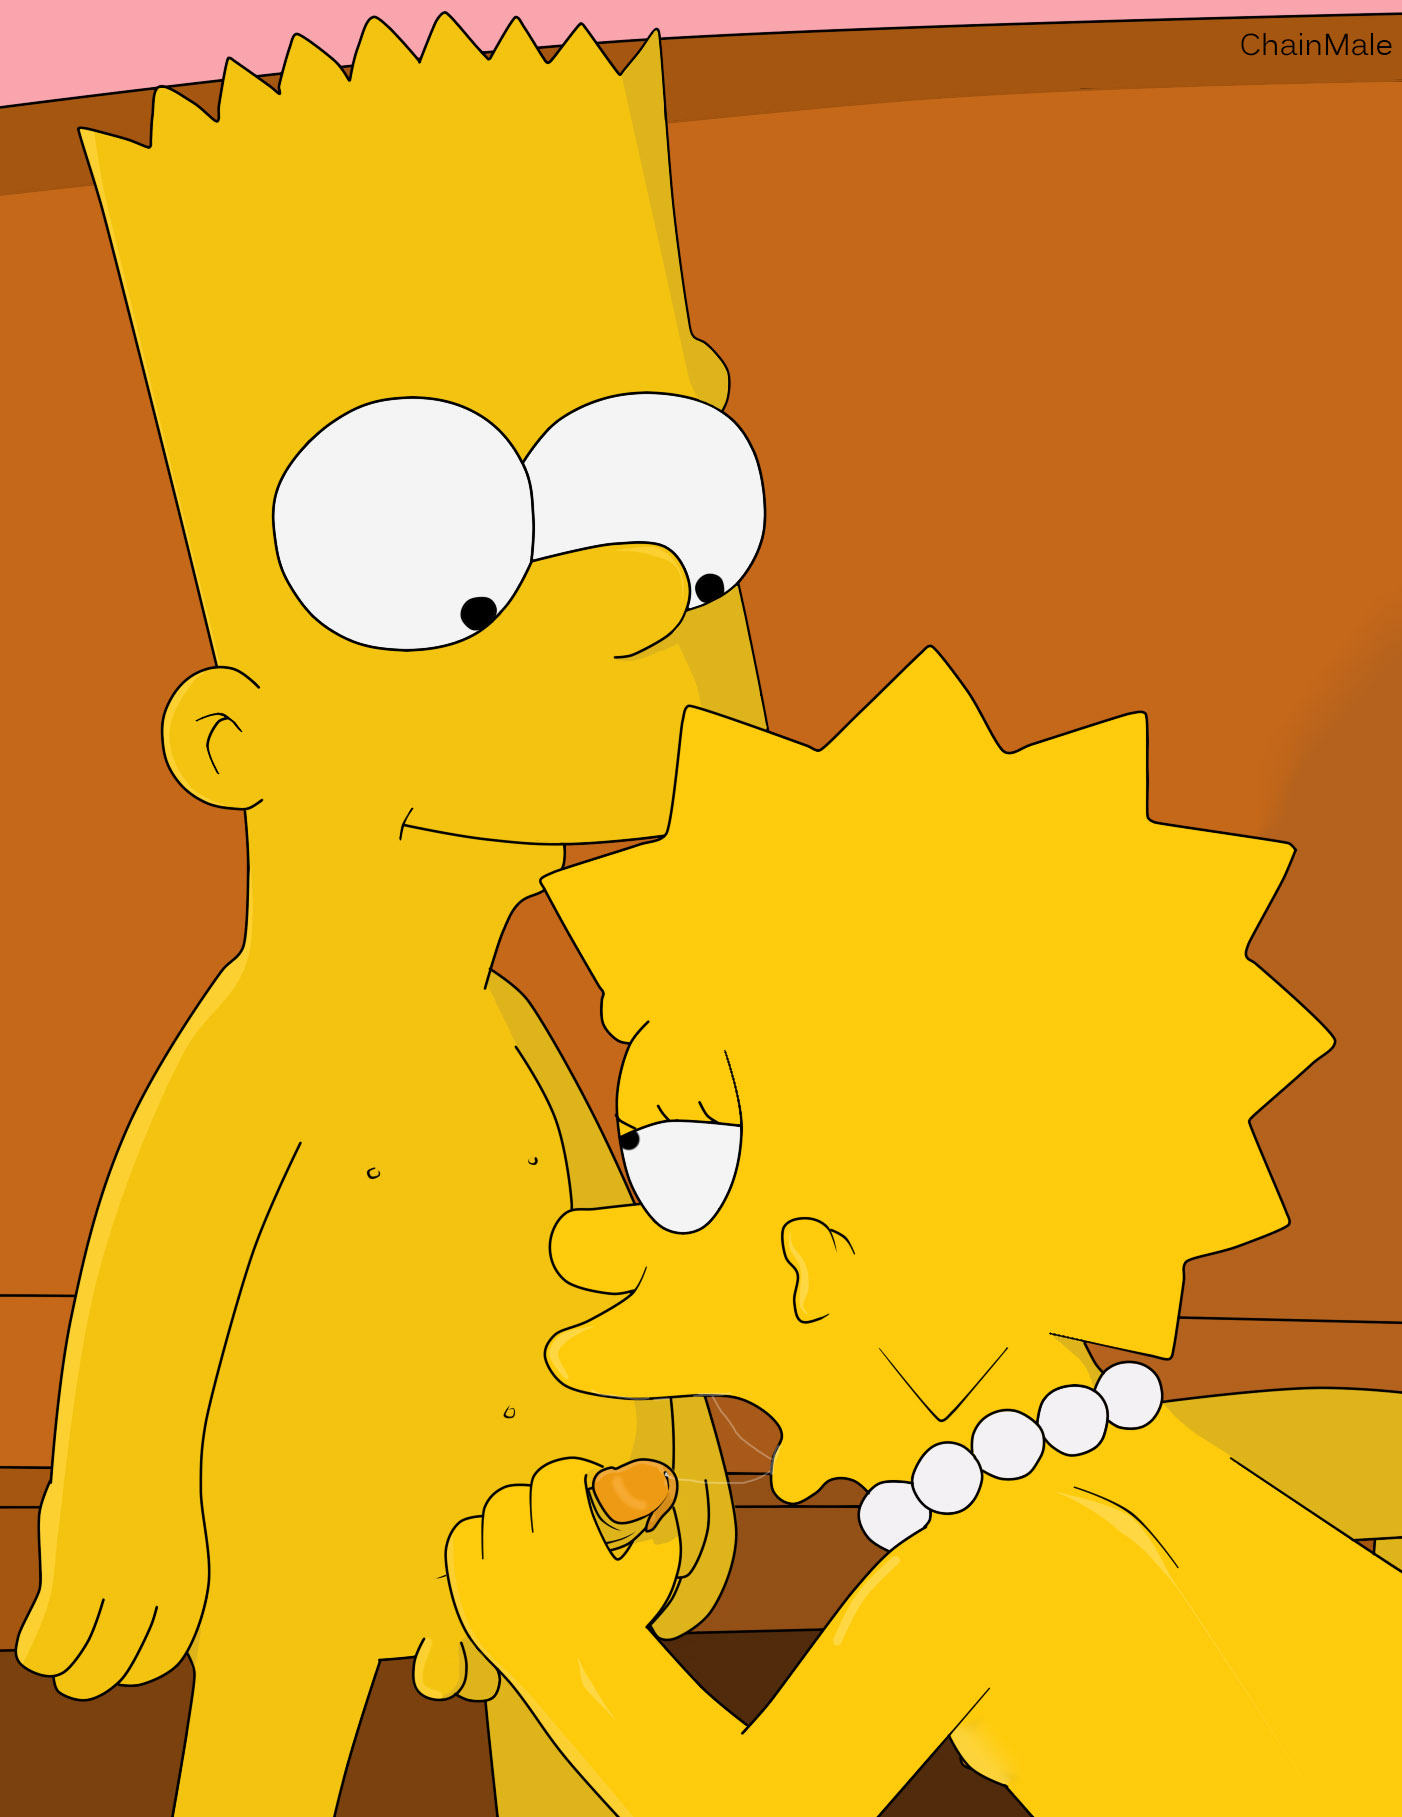 #pic1338622: Bart Simpson - ChainMale - Lisa Simpson - The Simpsons.